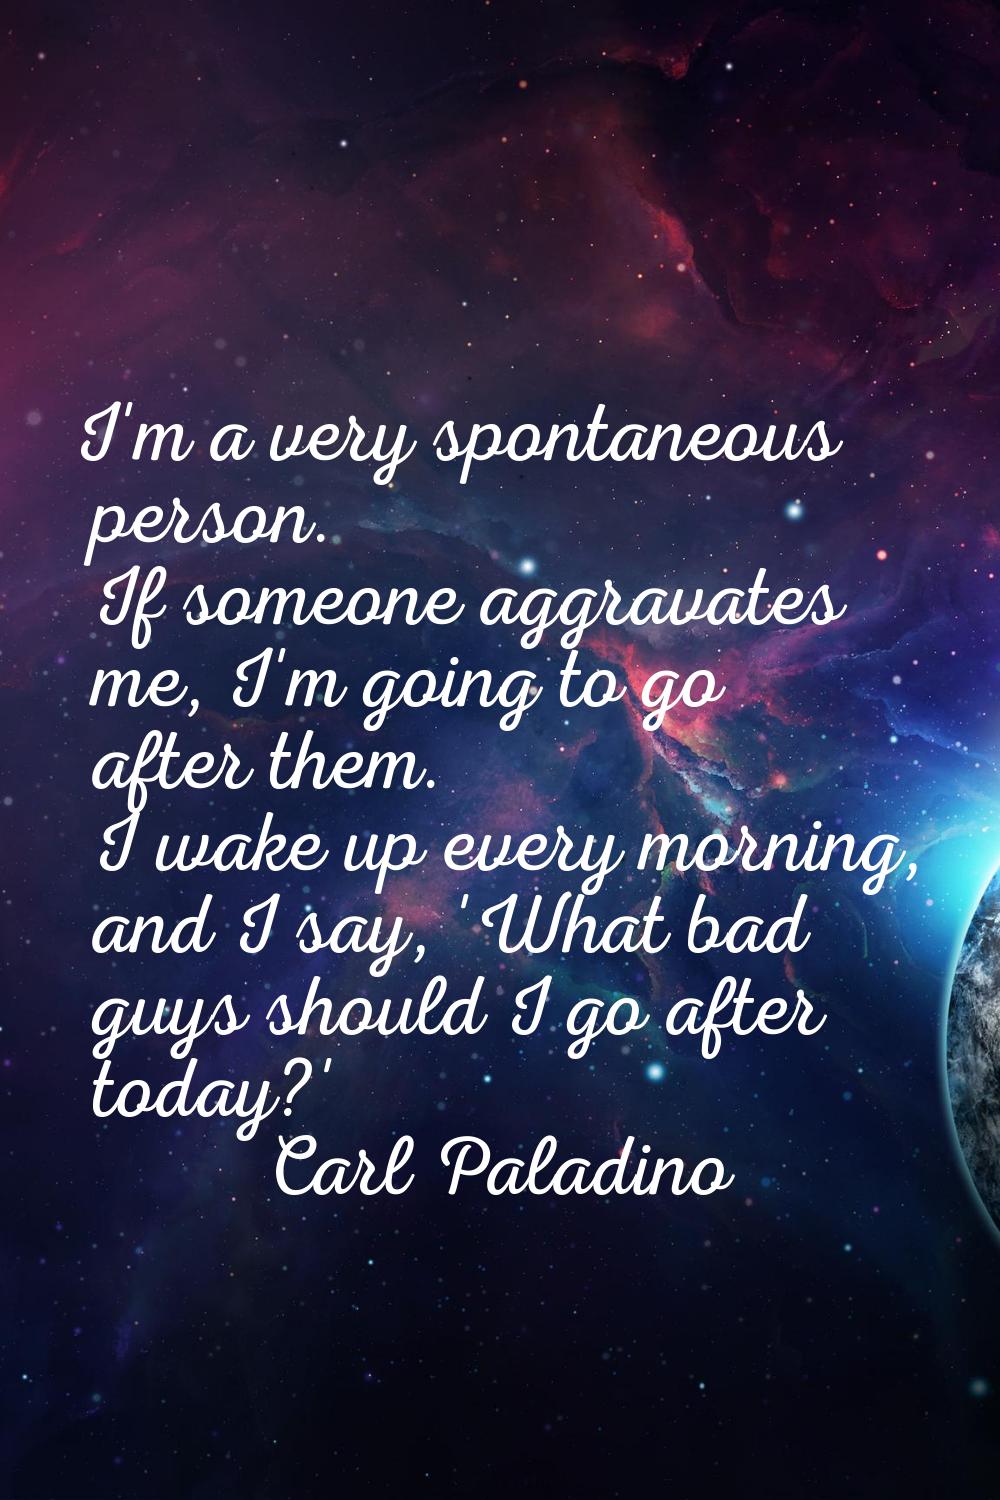 I'm a very spontaneous person. If someone aggravates me, I'm going to go after them. I wake up ever